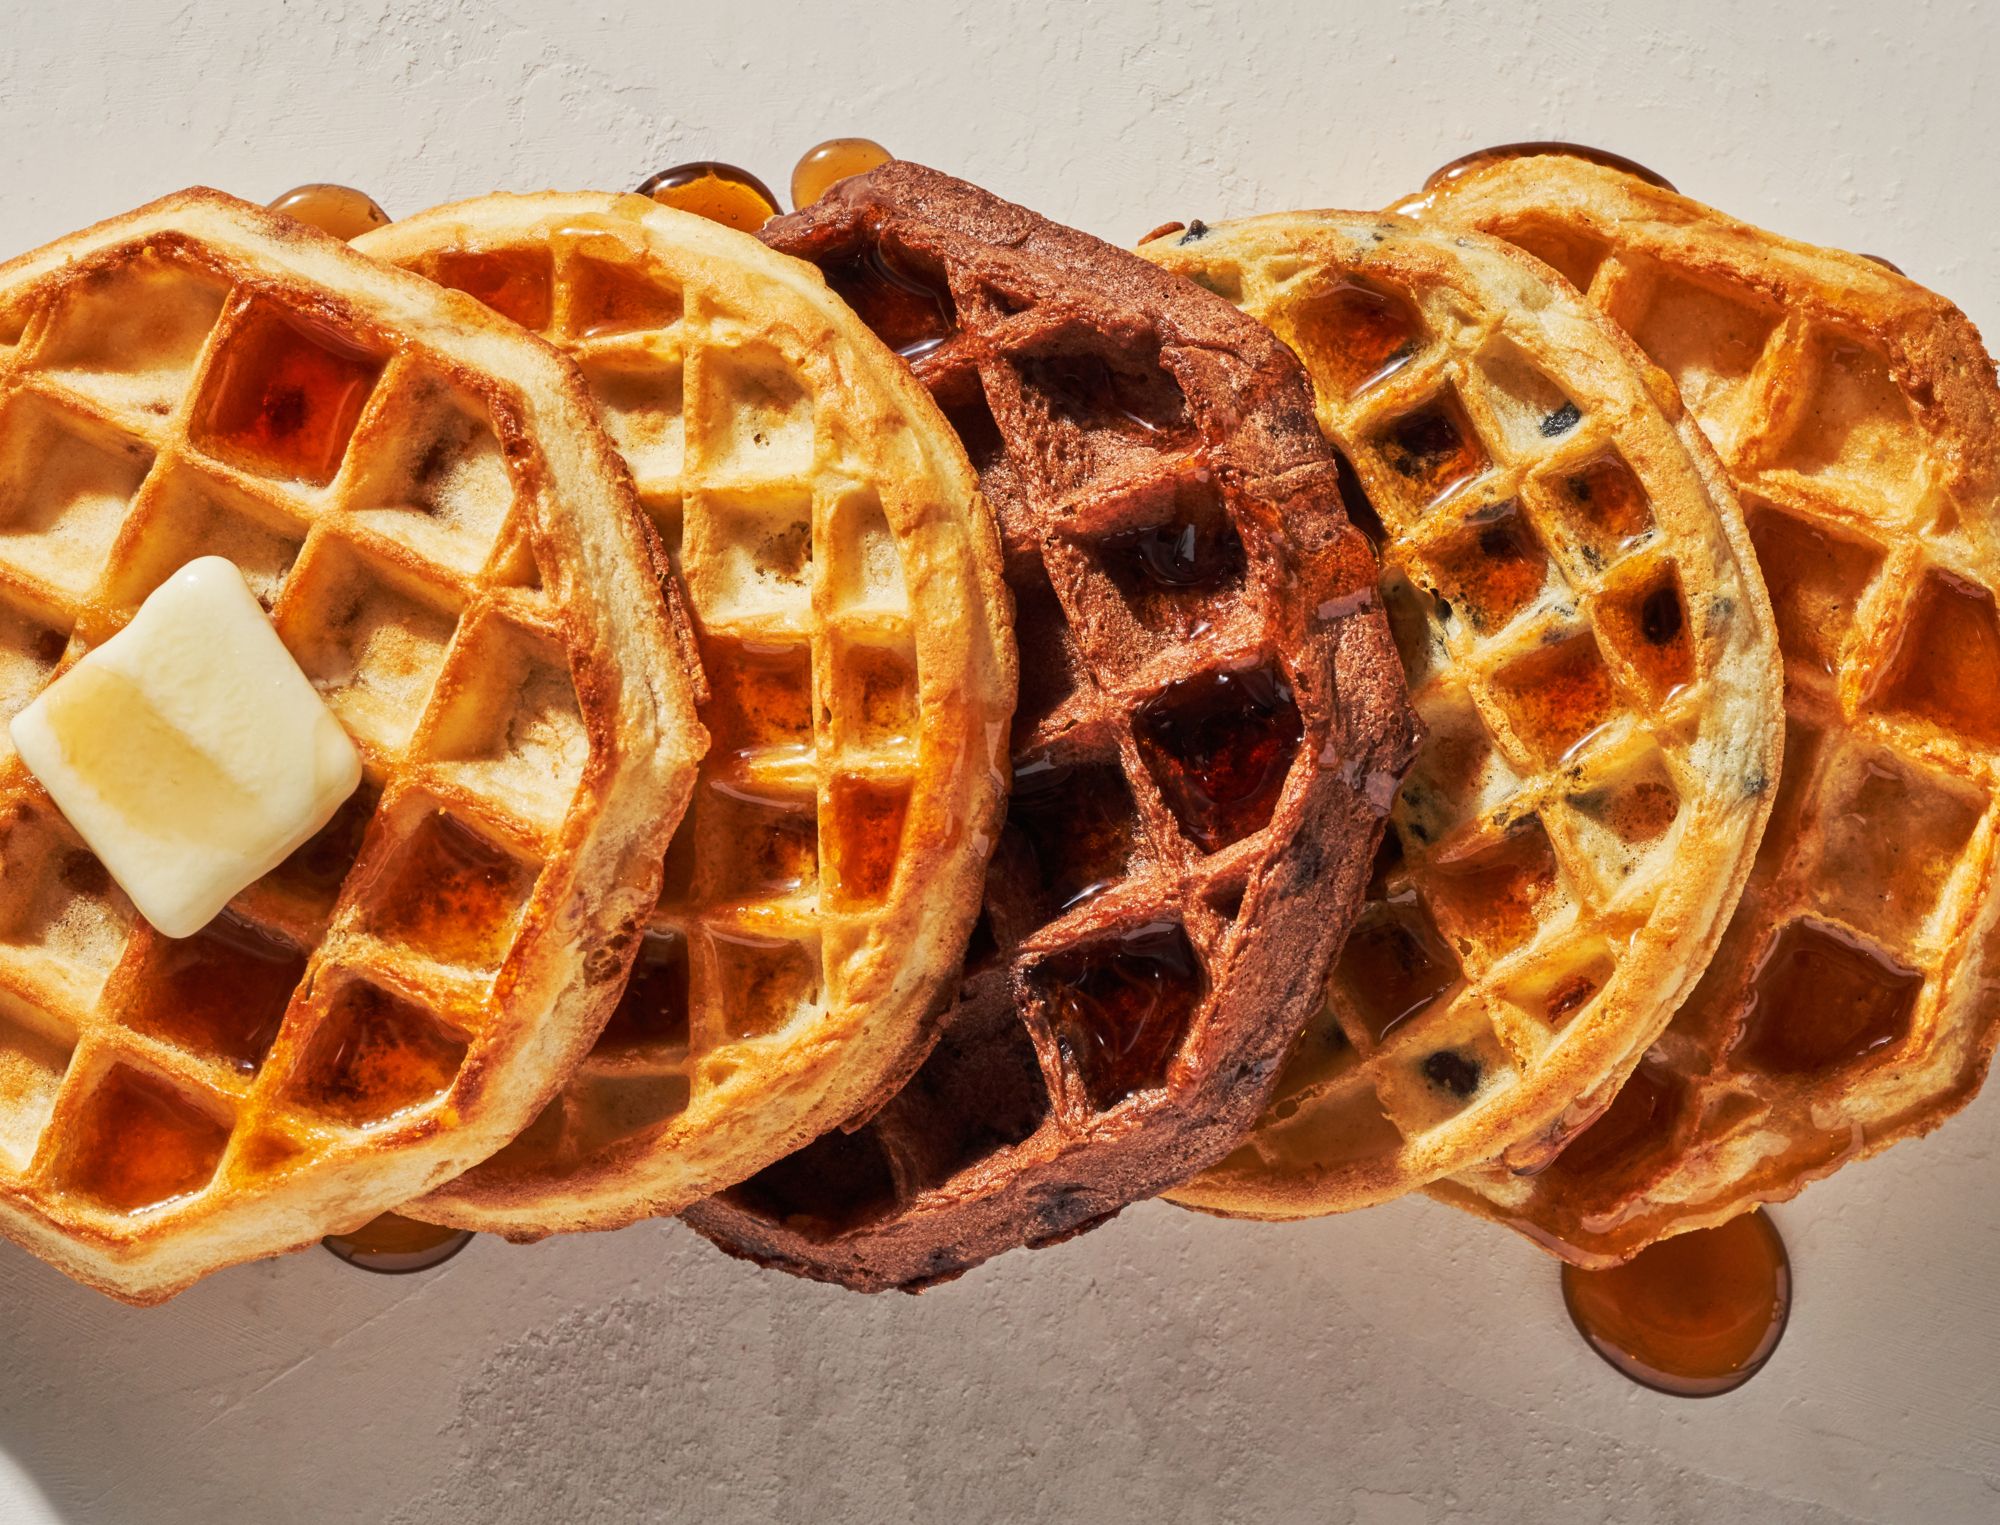 5 Best Eggo Waffle Flavors Based On Their Fluff-To-Crunch Ratio